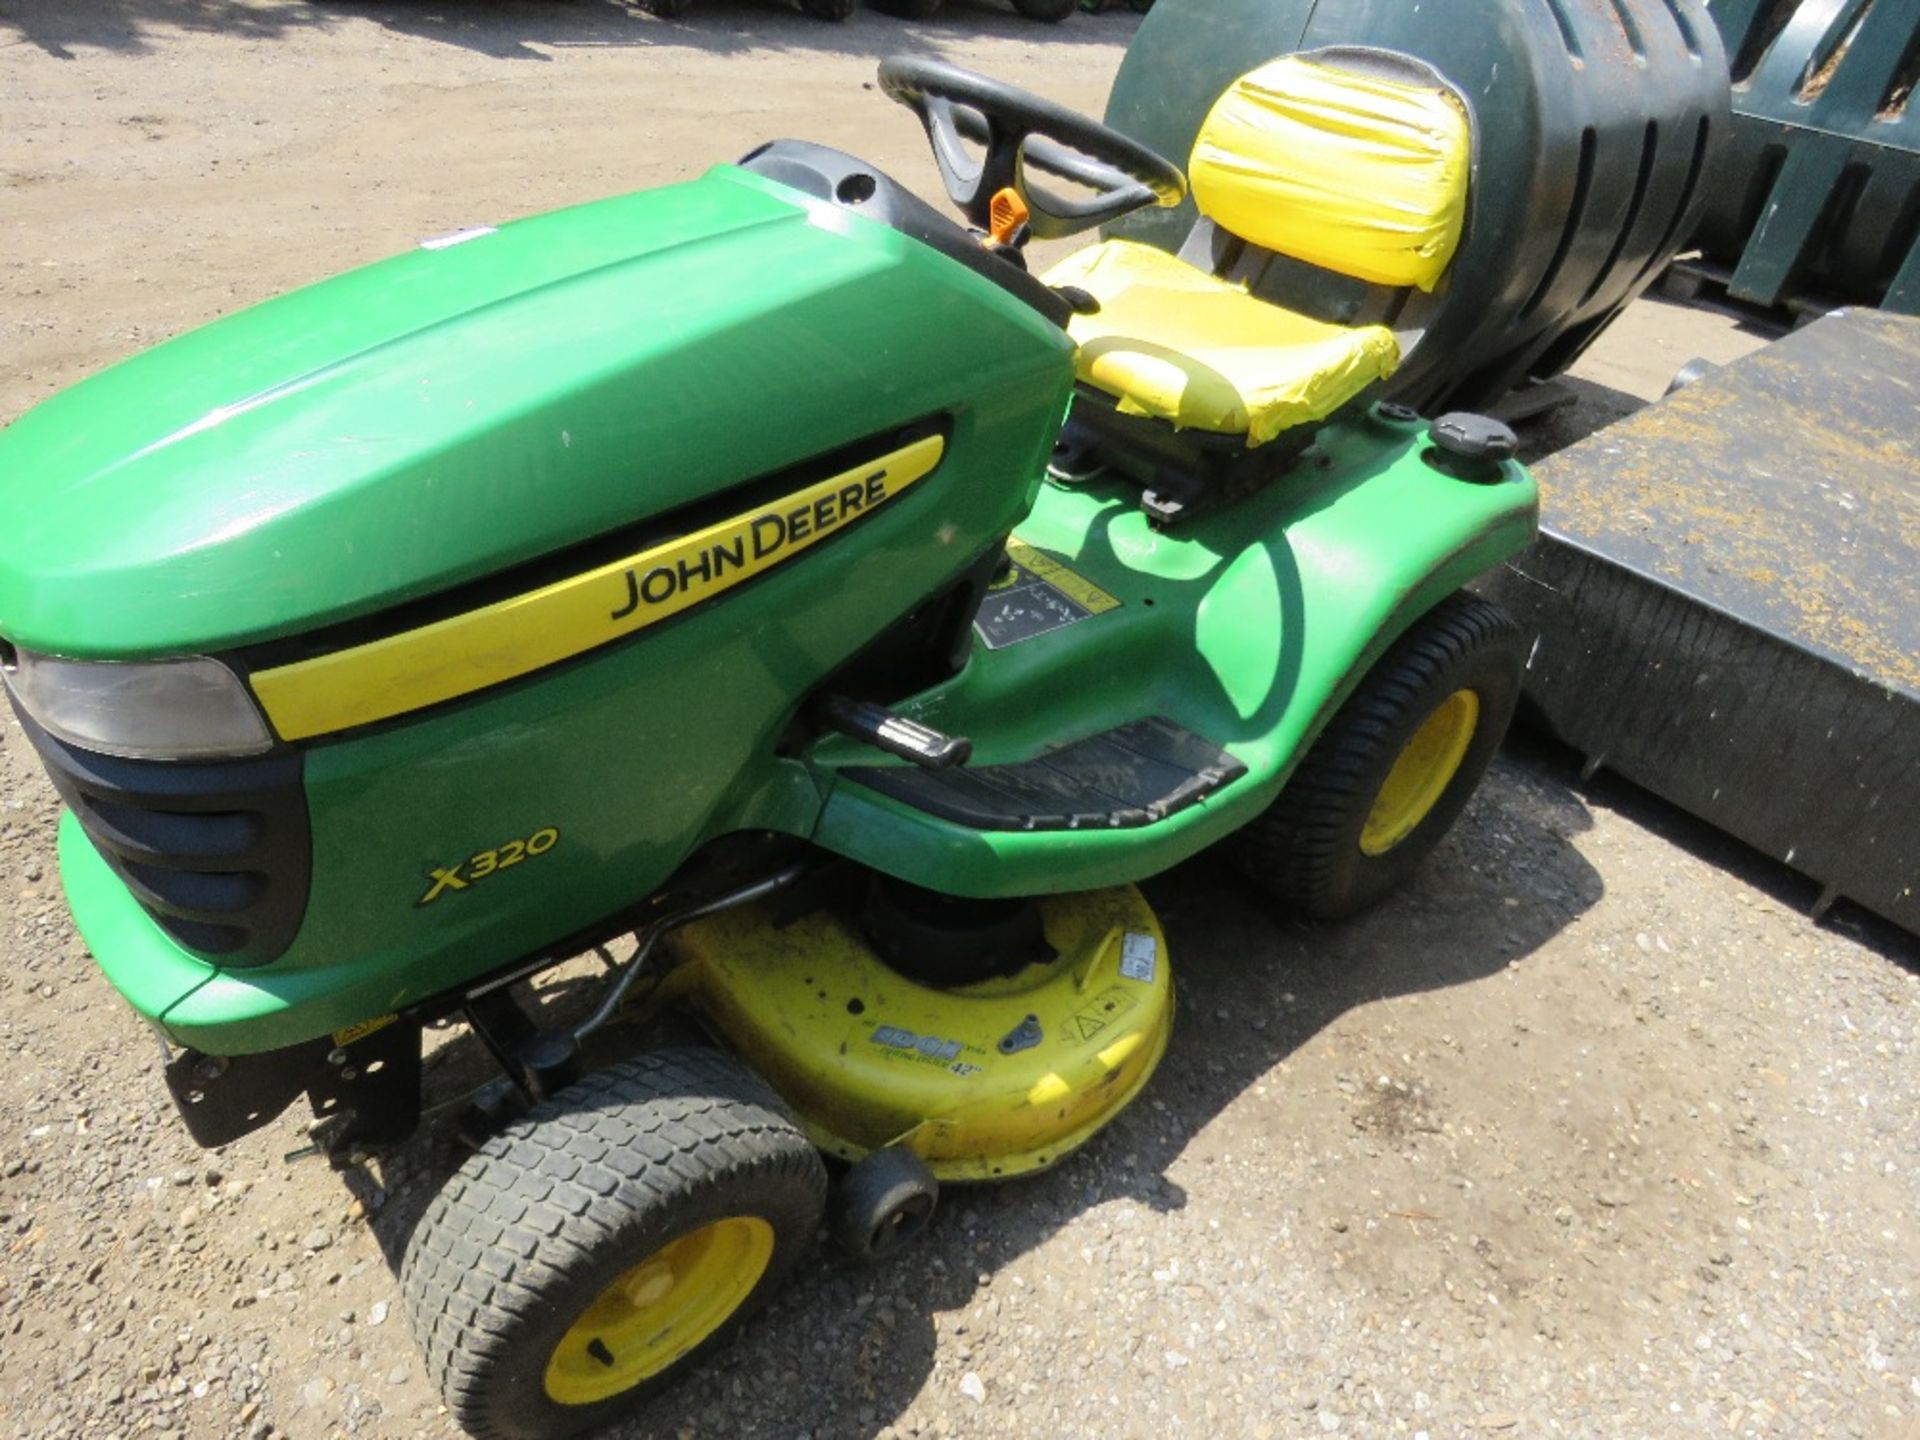 JOHN DEERE X320 PETROL RIDE ON MOWER, 756 REC HOURS. RUNS AND DRIVES BUT MOWERS NOT ENGAGING...NO BE - Image 7 of 11